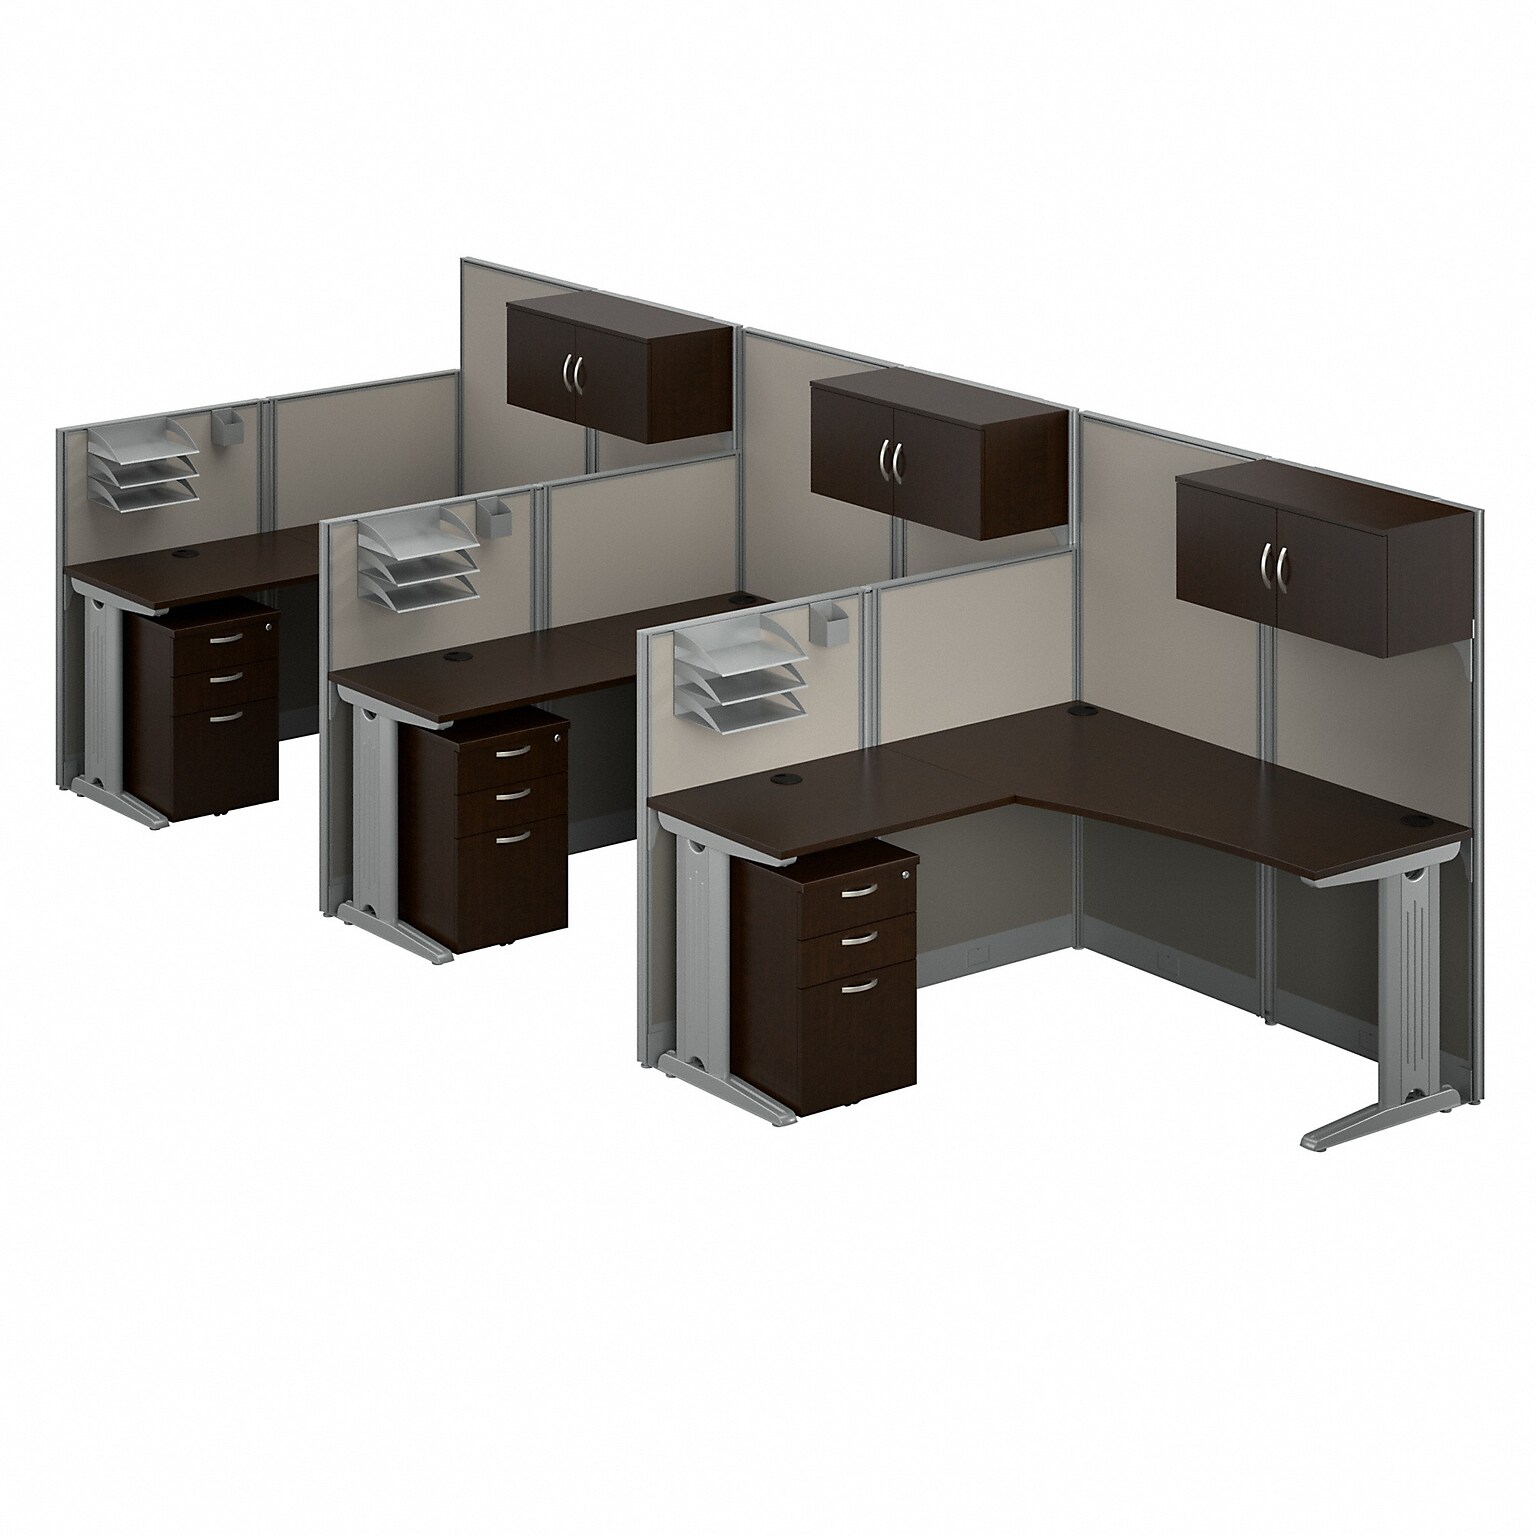 Bush Business Furniture Office in an Hour 63H x 193W 3 Person L-Shaped Cubicle Workstation, Mocha Cherry (OIAH006MR)